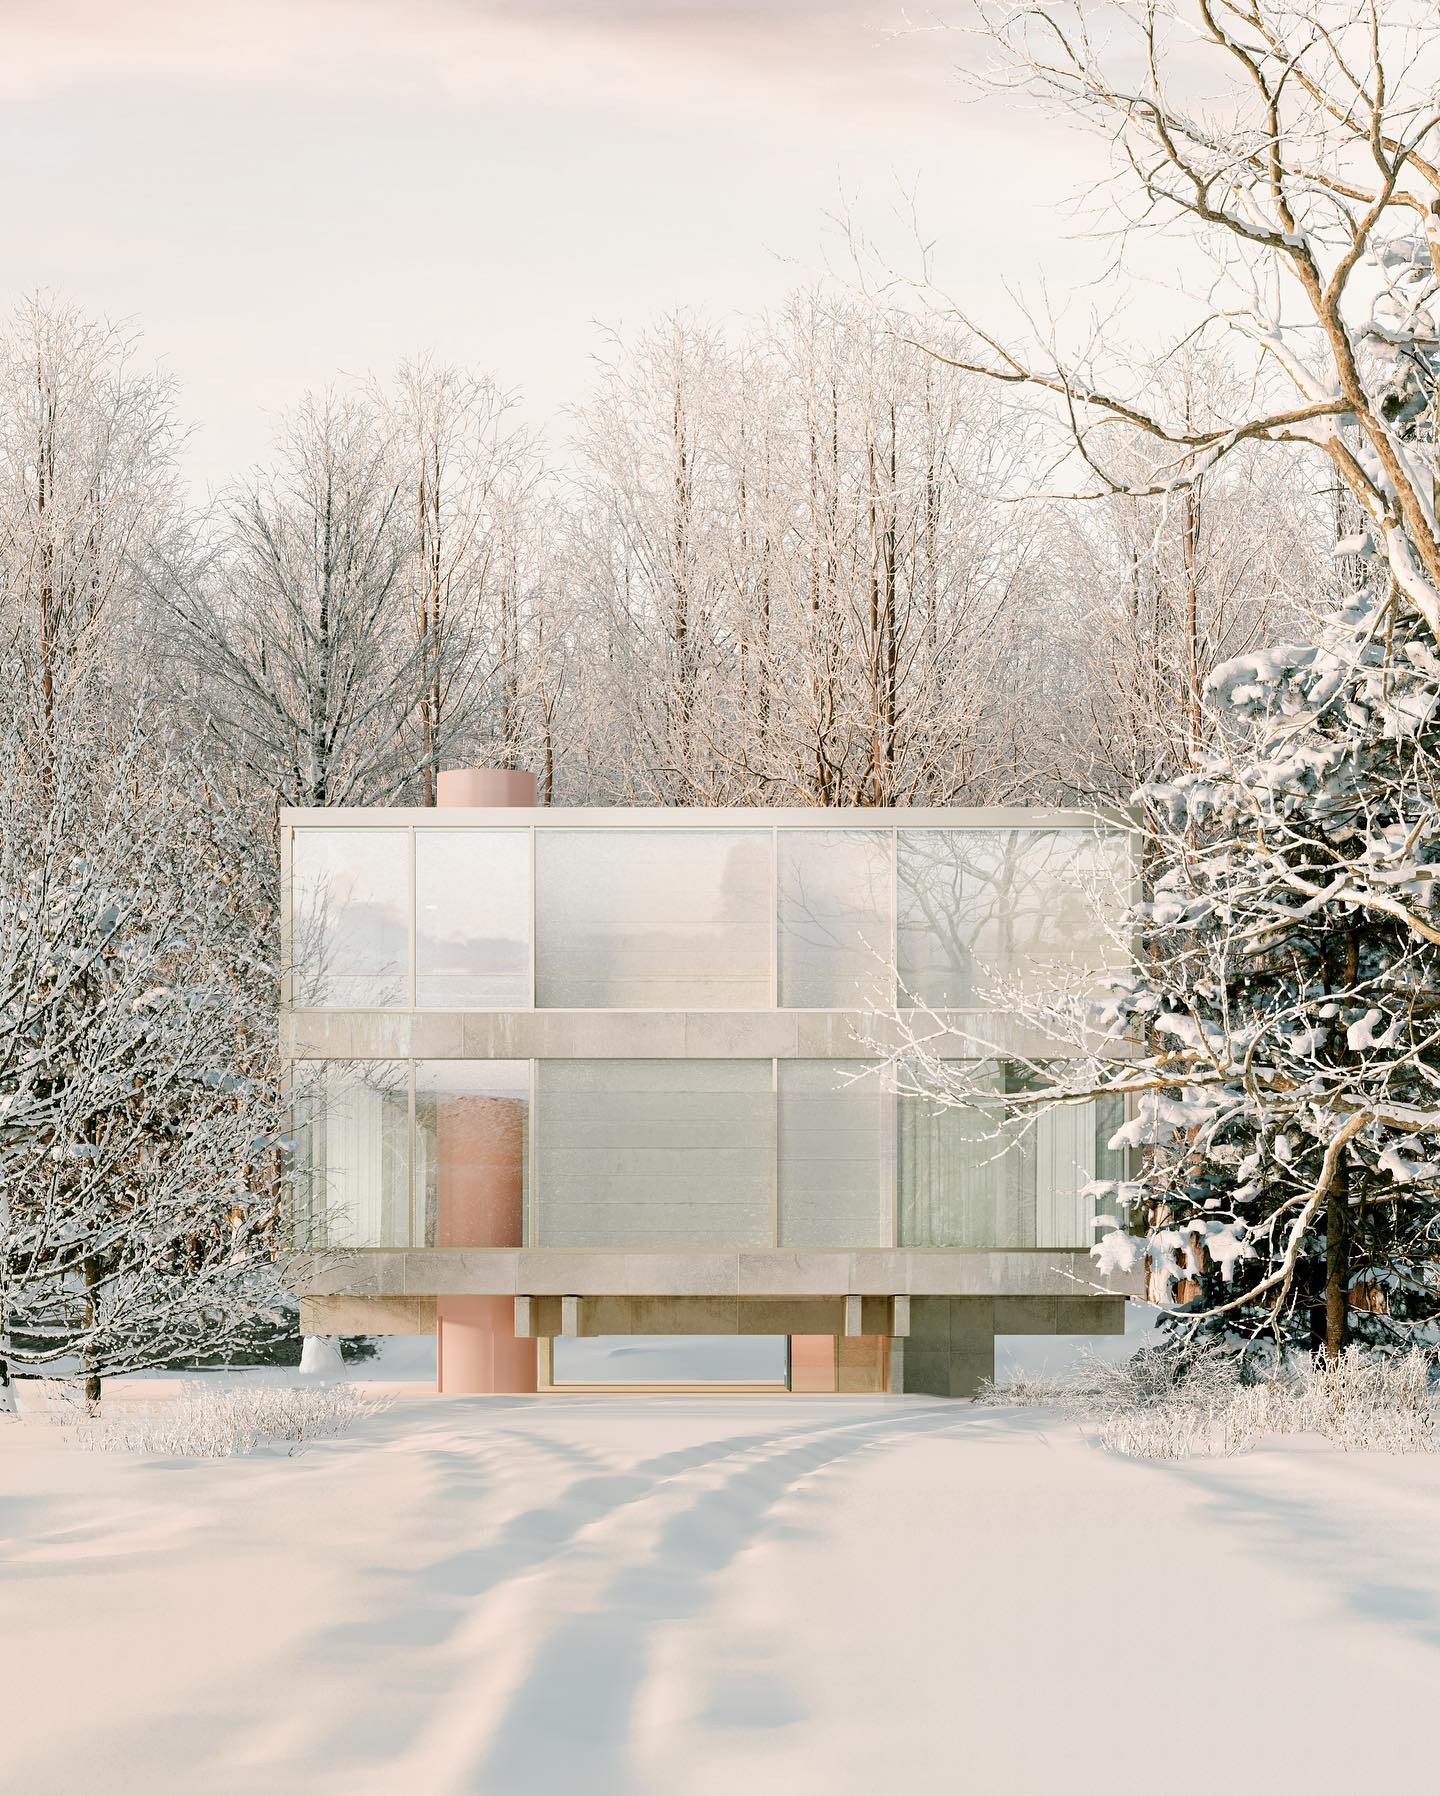 Décor Inspiration | Winter House: A Residence for the Metaverse